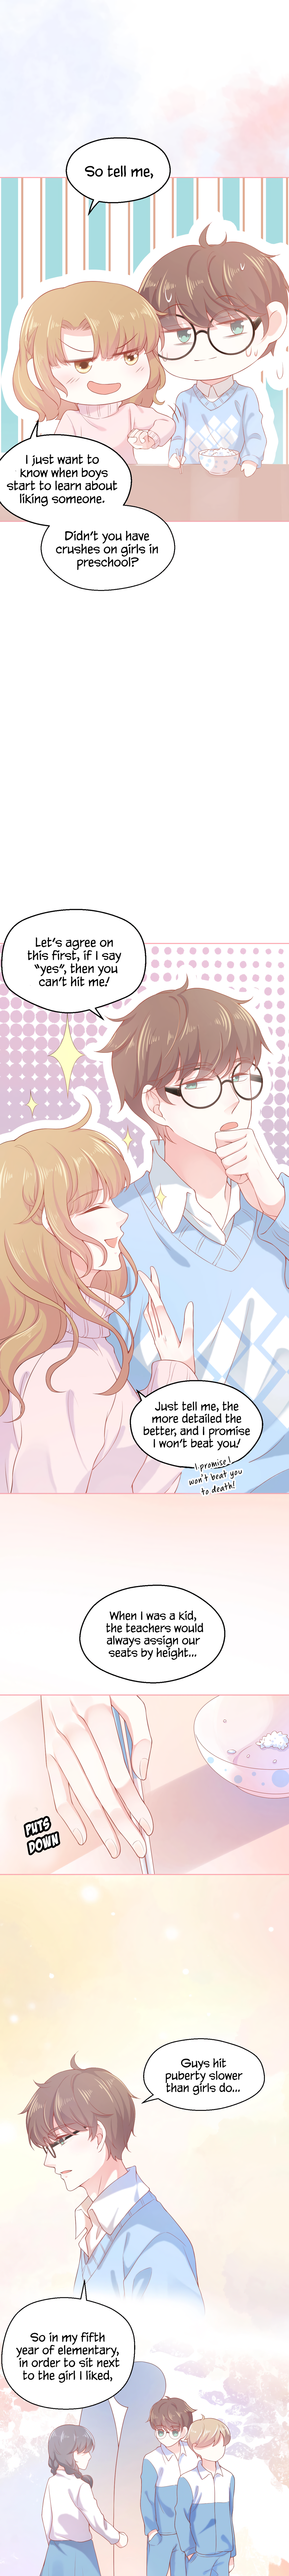 Being With You Means the World to Me Chapter 4 - Page 5